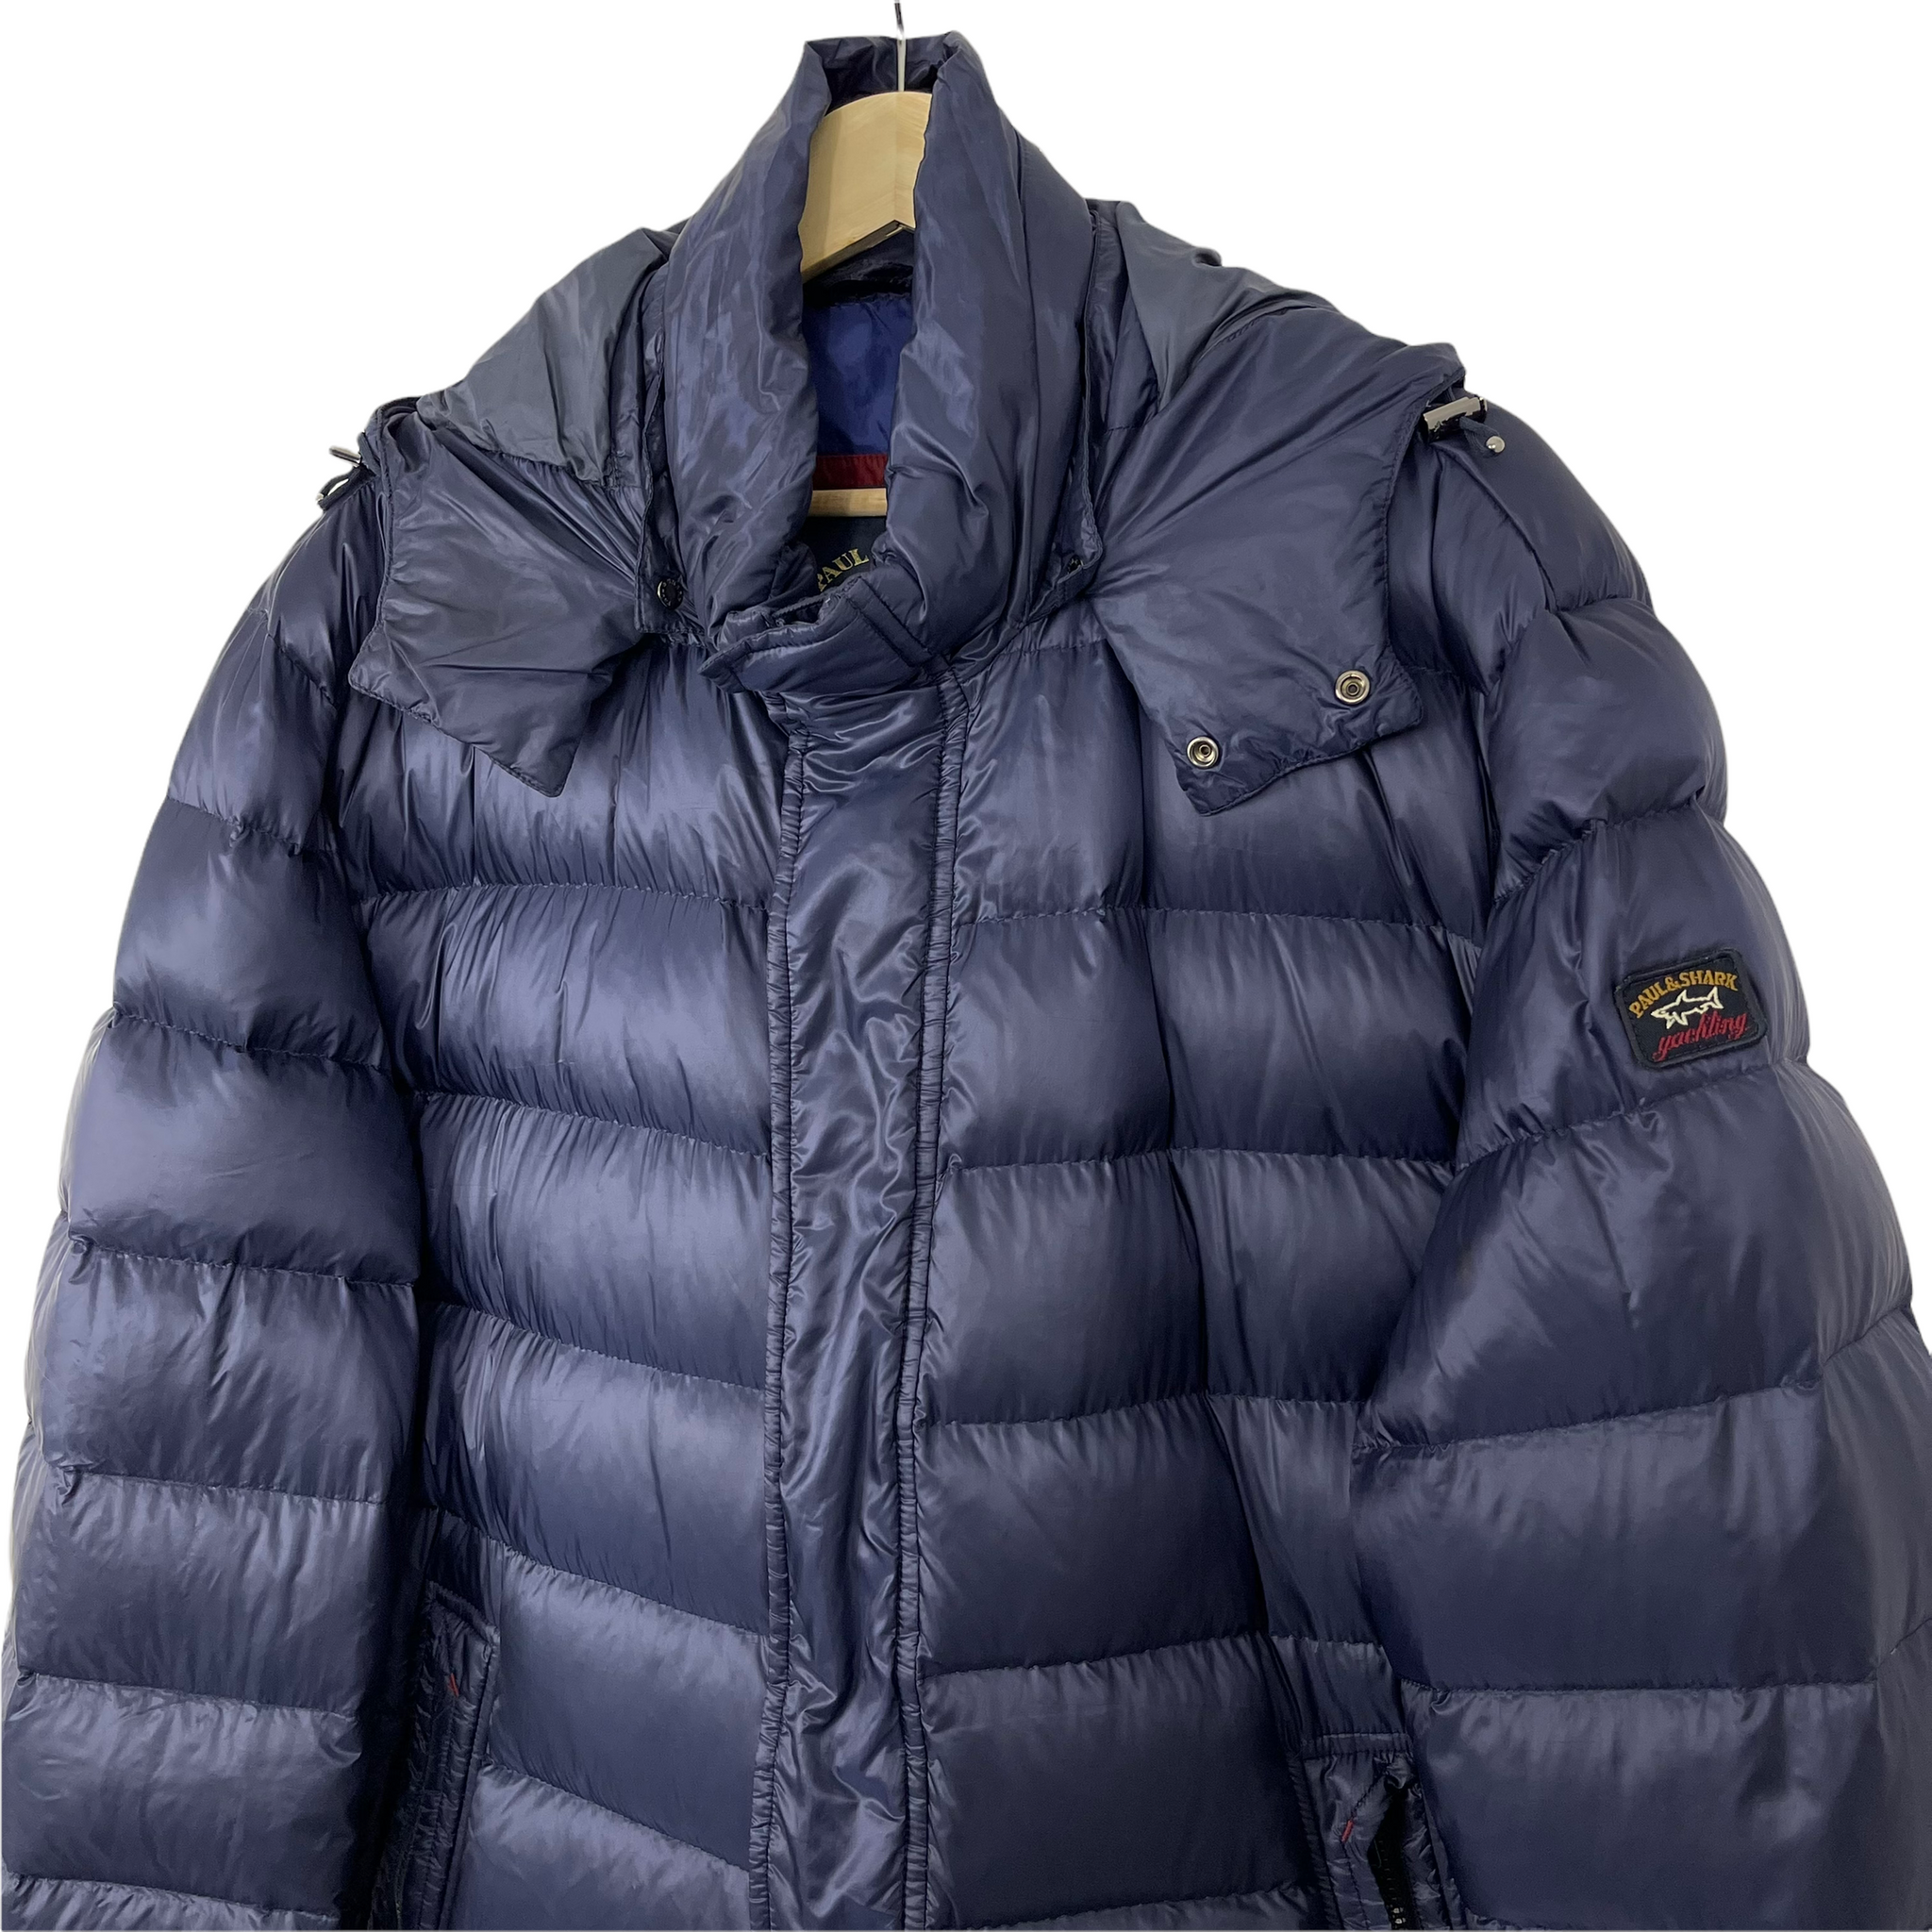 Paul and Shark Navy 700 Down Fill Puffer Jacket - Triple Extra